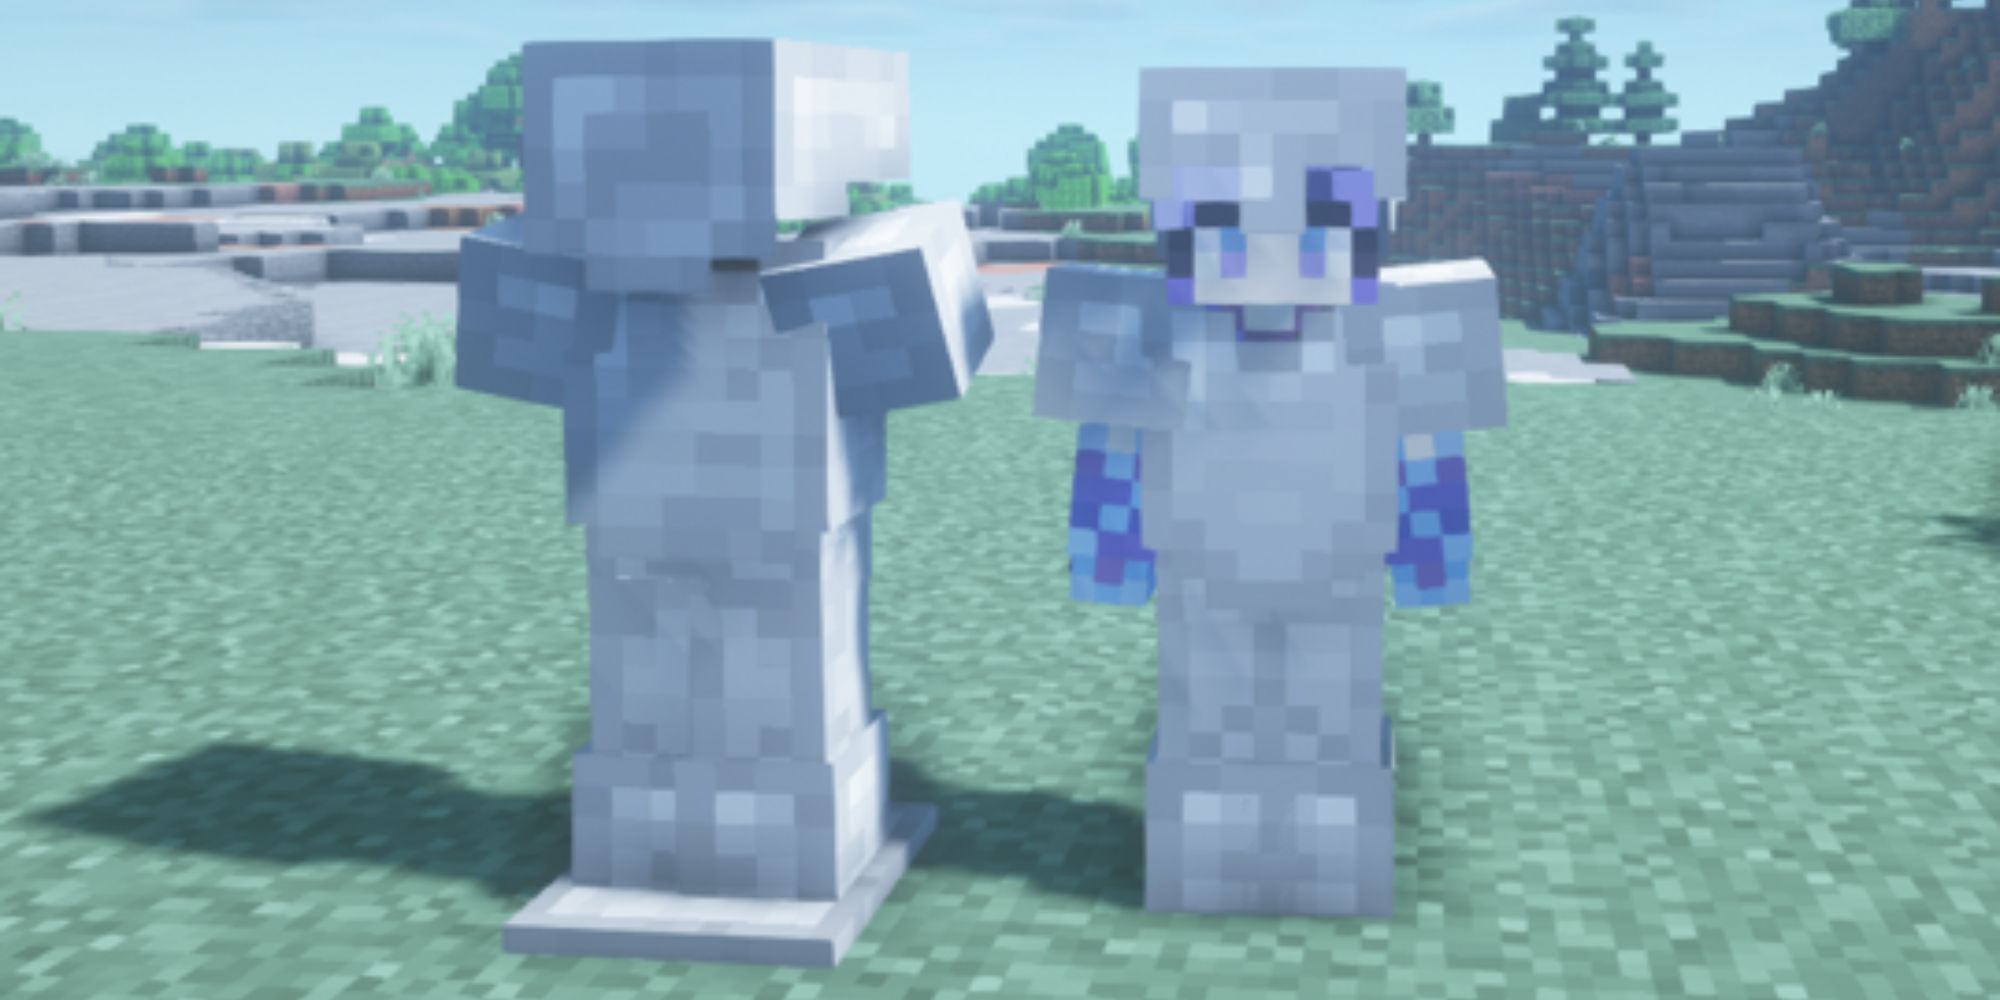 Minecraft Iron Armor on character and mannequin side by side